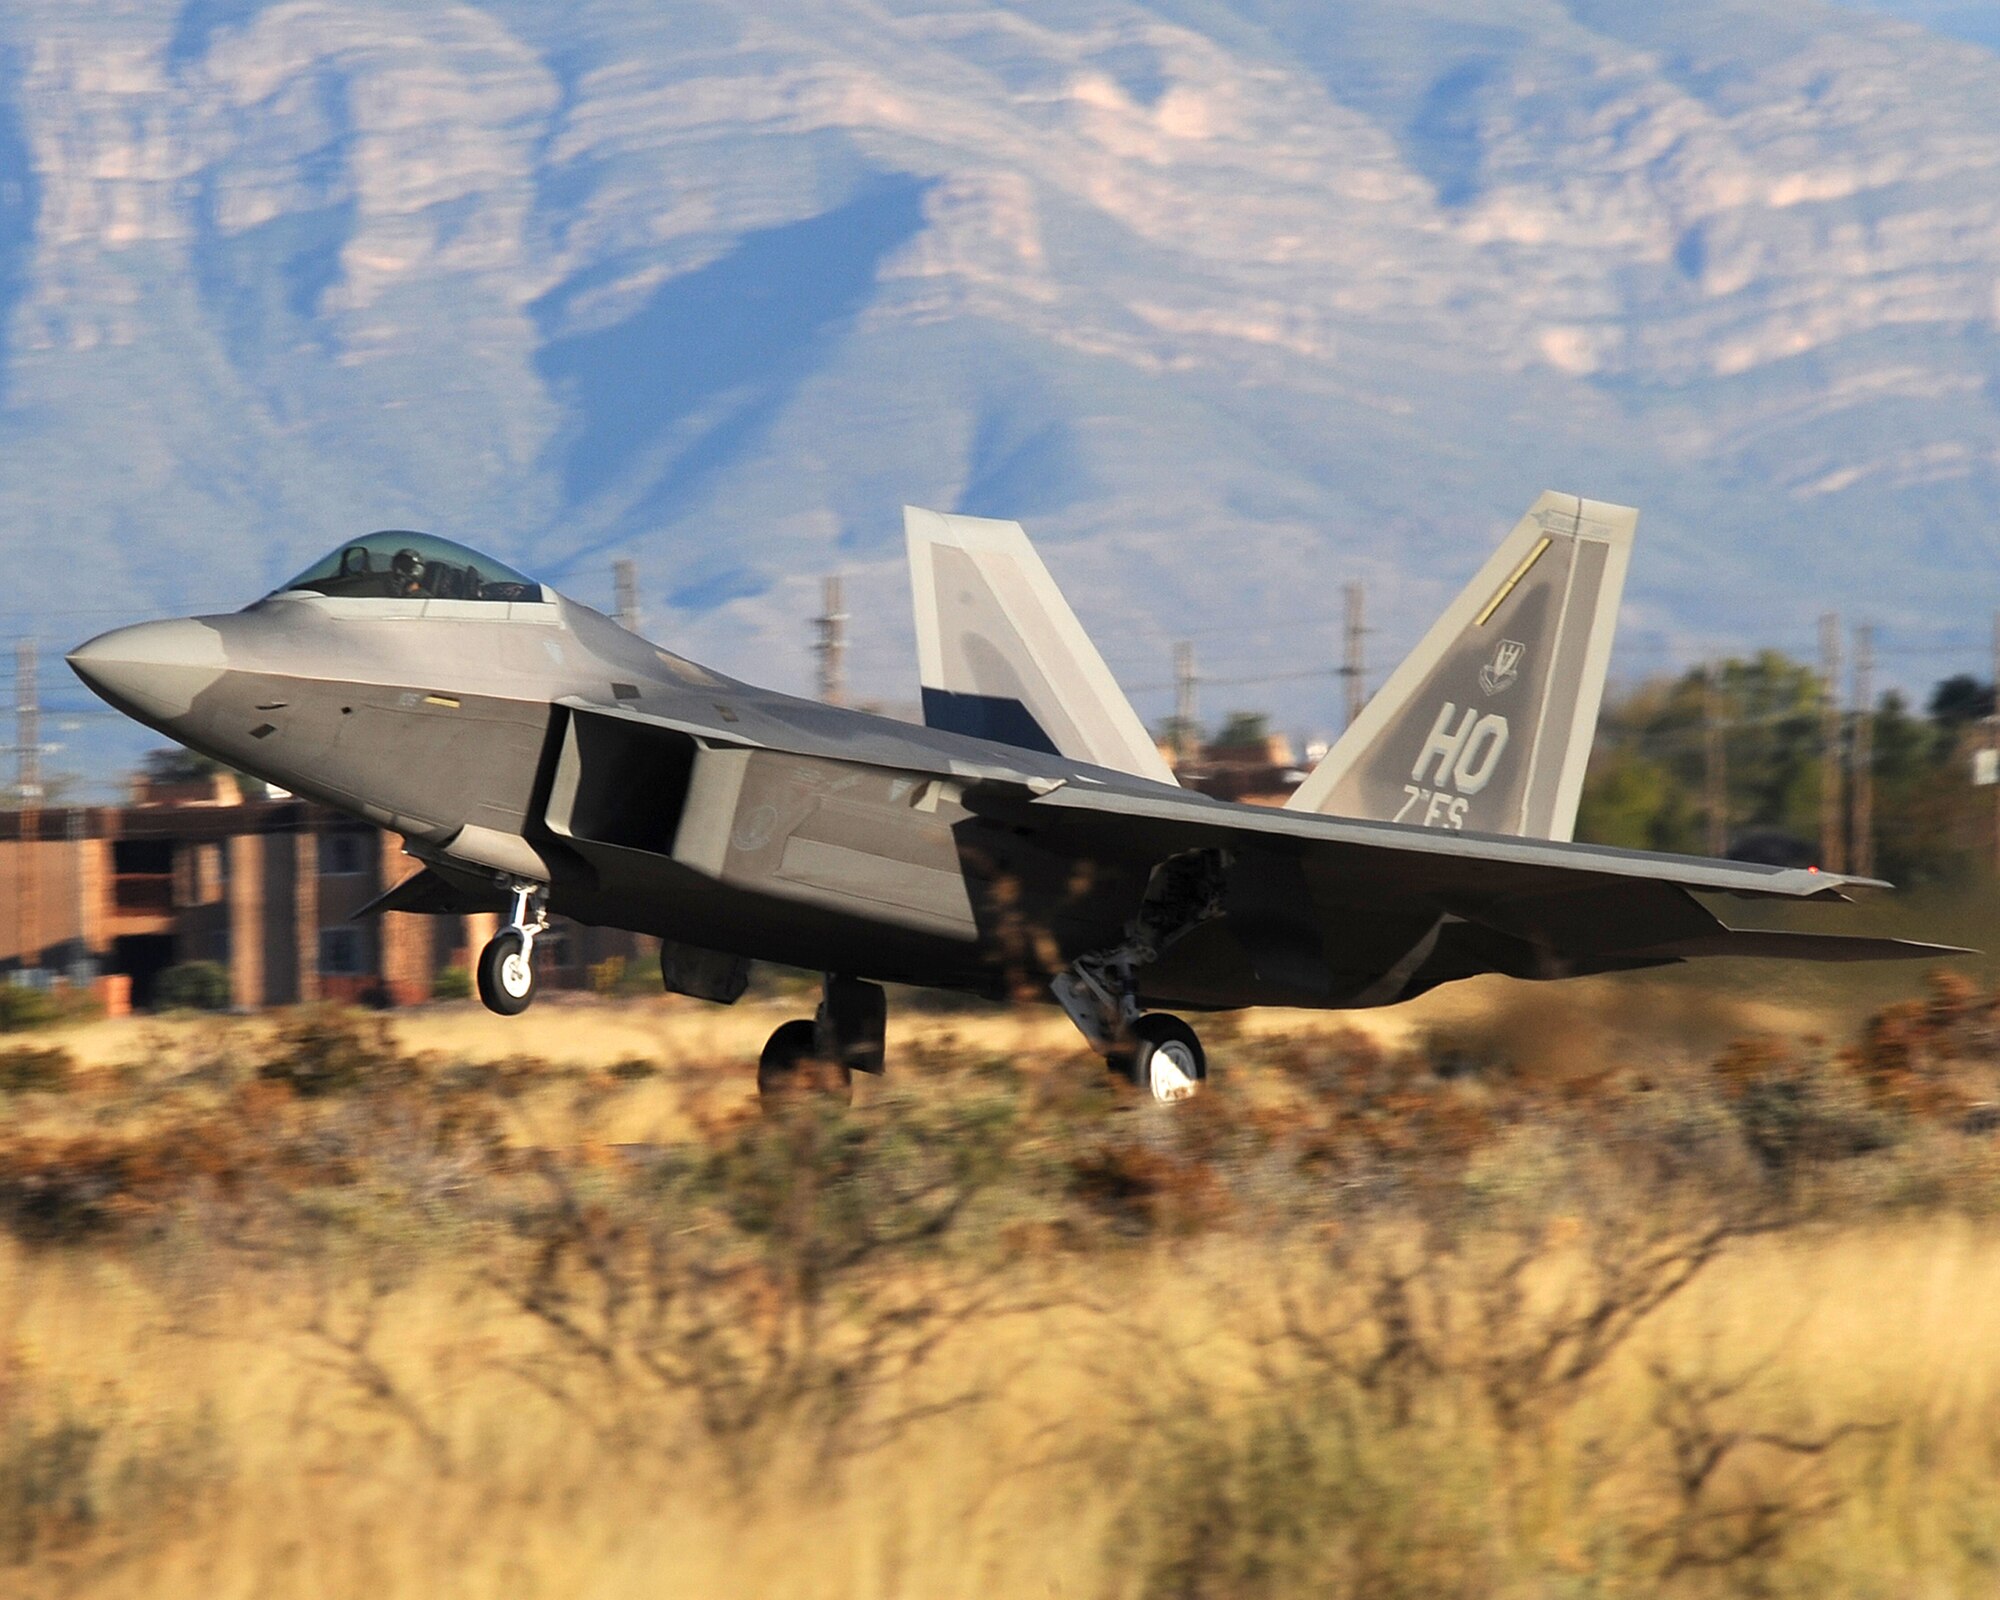 An F-22A takes off at  Holloman Air Force Base, N.M., October 22 for training missions in the local area. It is the first time Holloman launches the fleet of F-22's to test the aircraft's ability to fly two ship operations. (U.S. Air Force photo/Tech. Sgt. Chris Flahive)